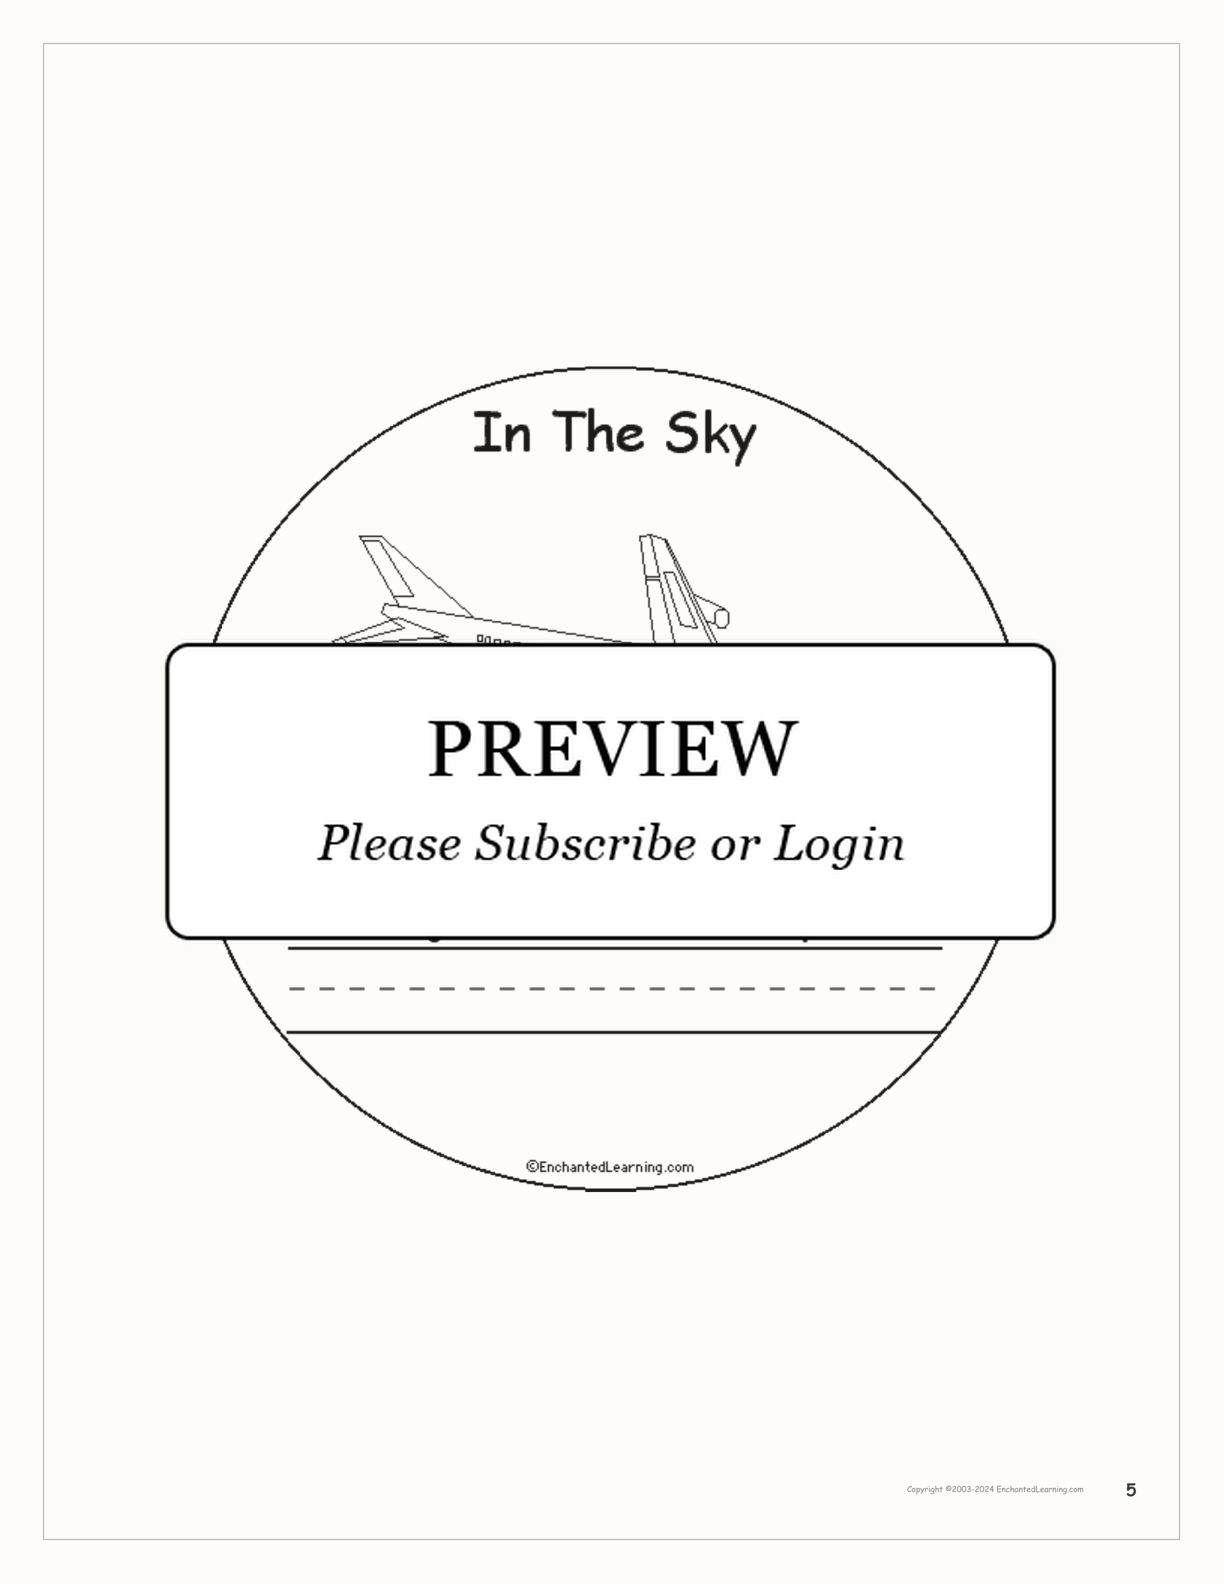 'In The Sky' Book interactive printout page 5